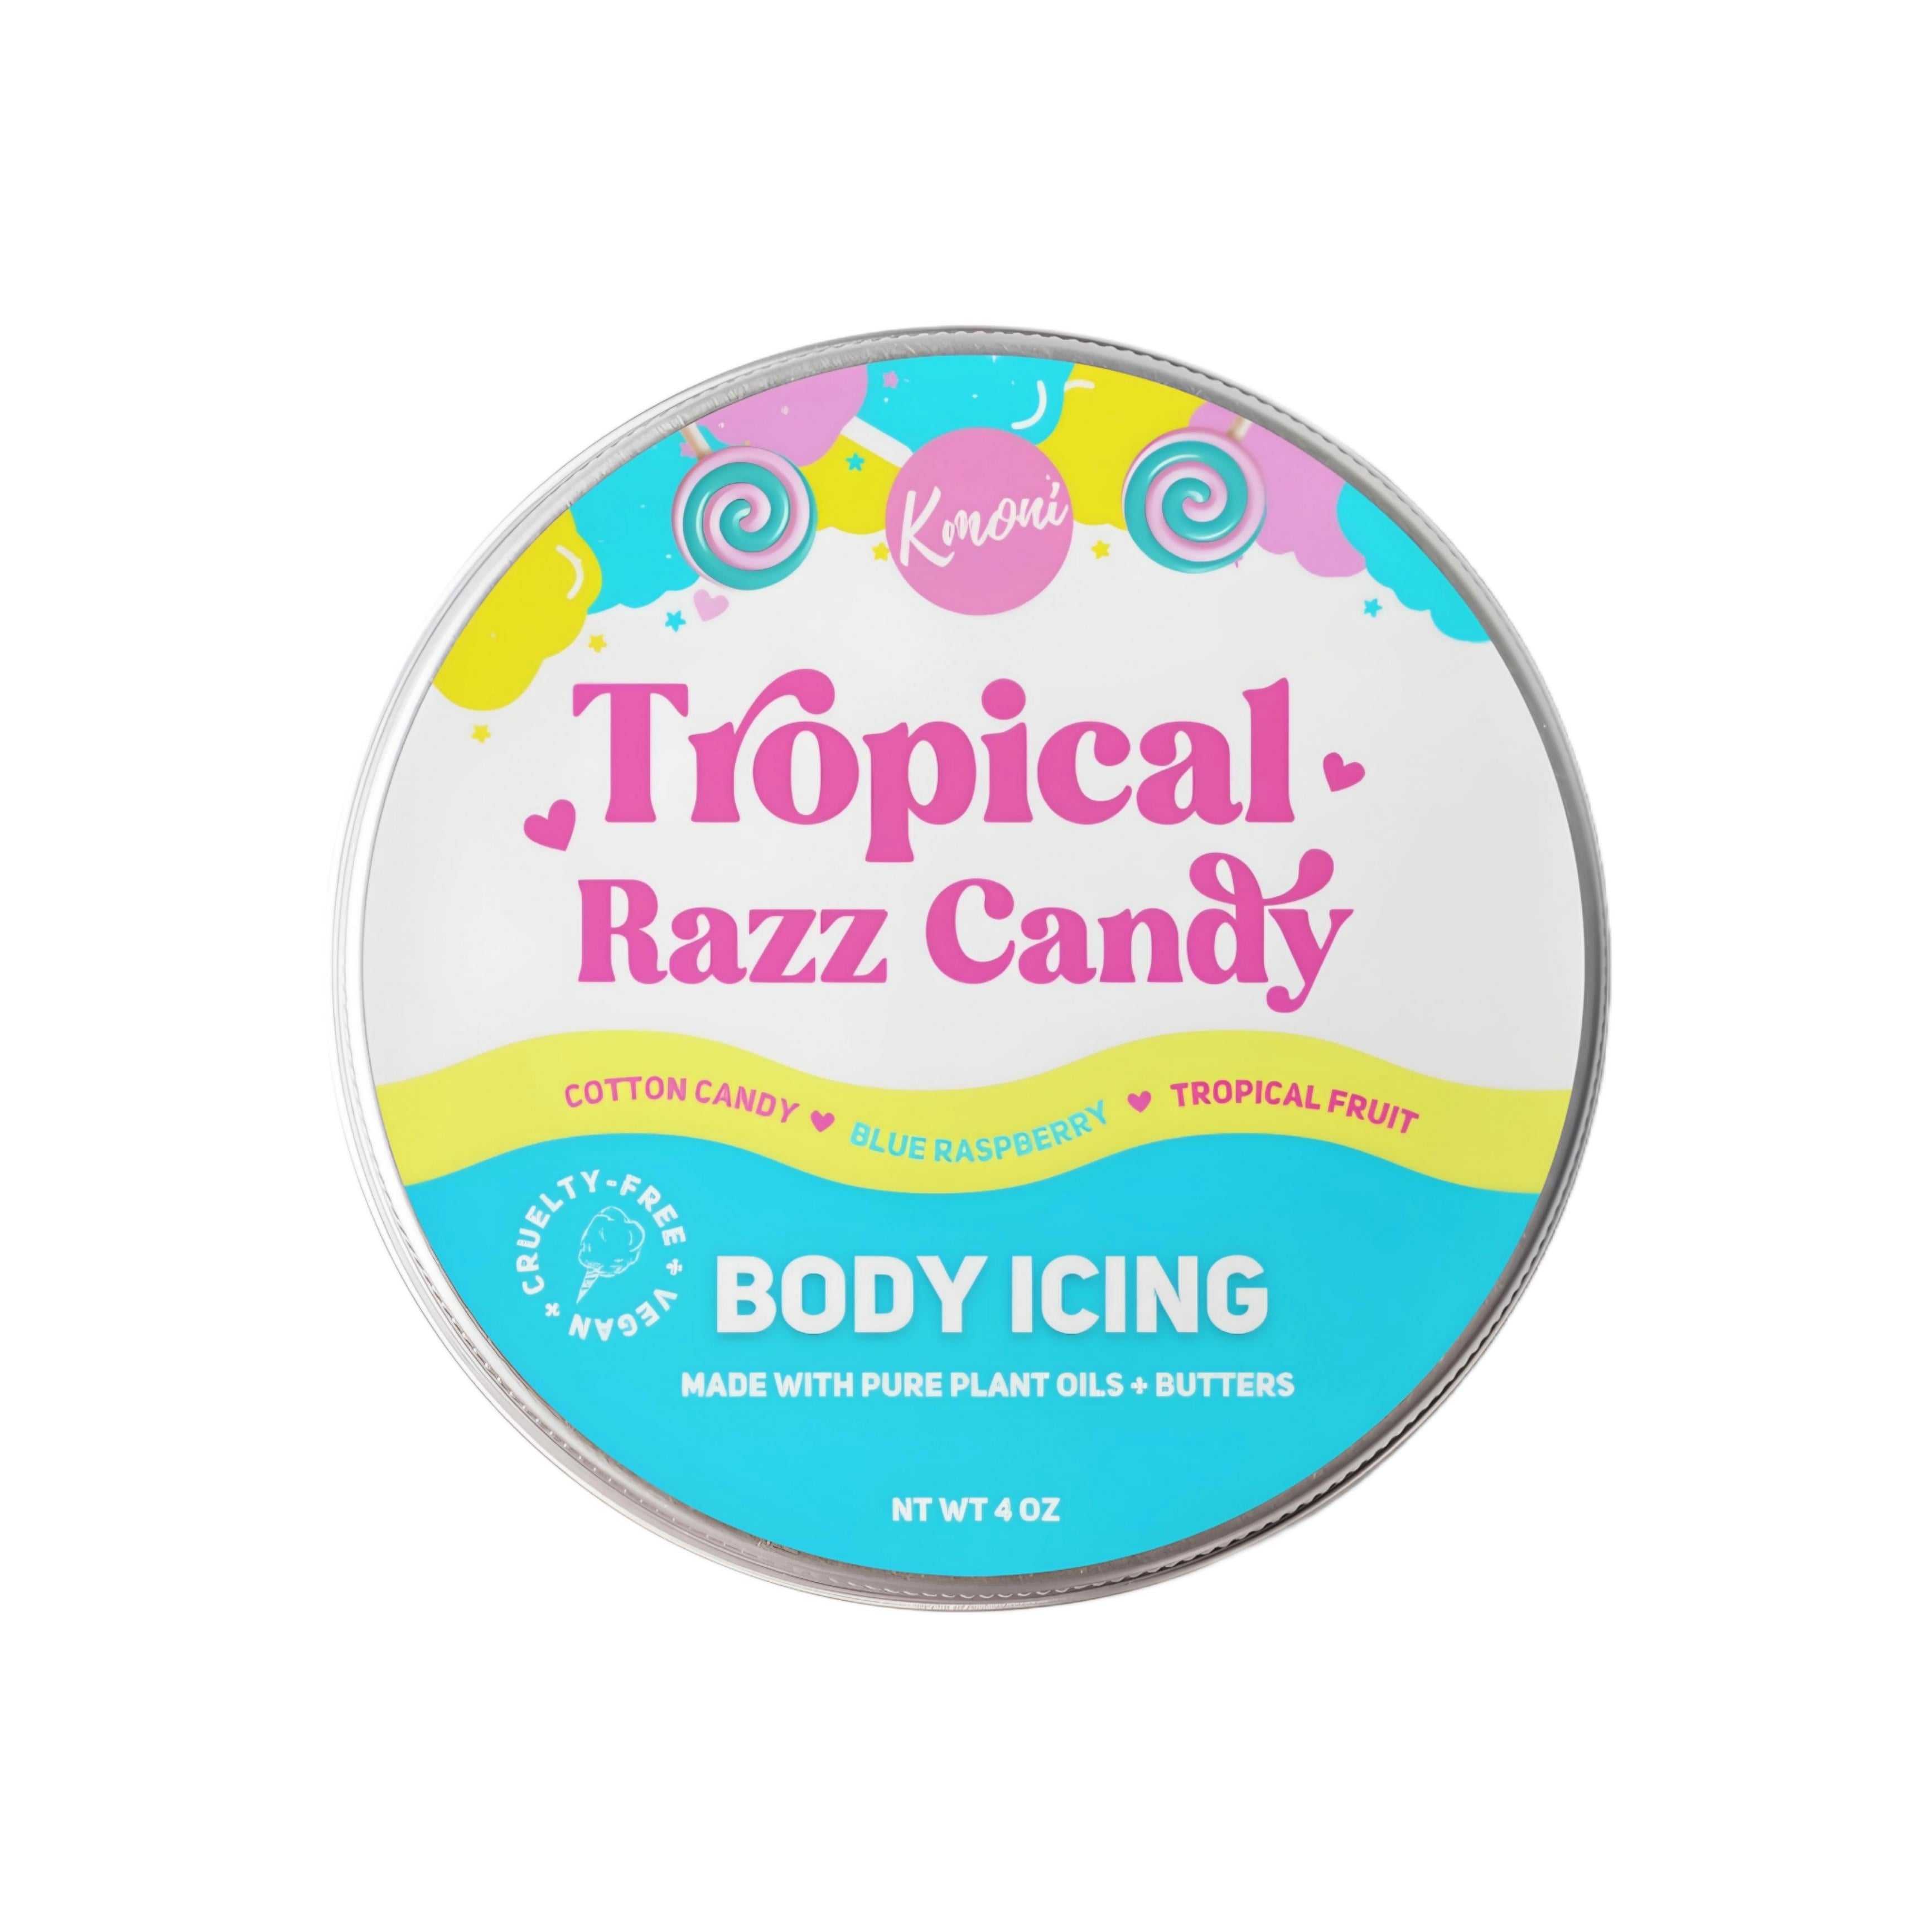 Tropical Razz Candy Body Icing